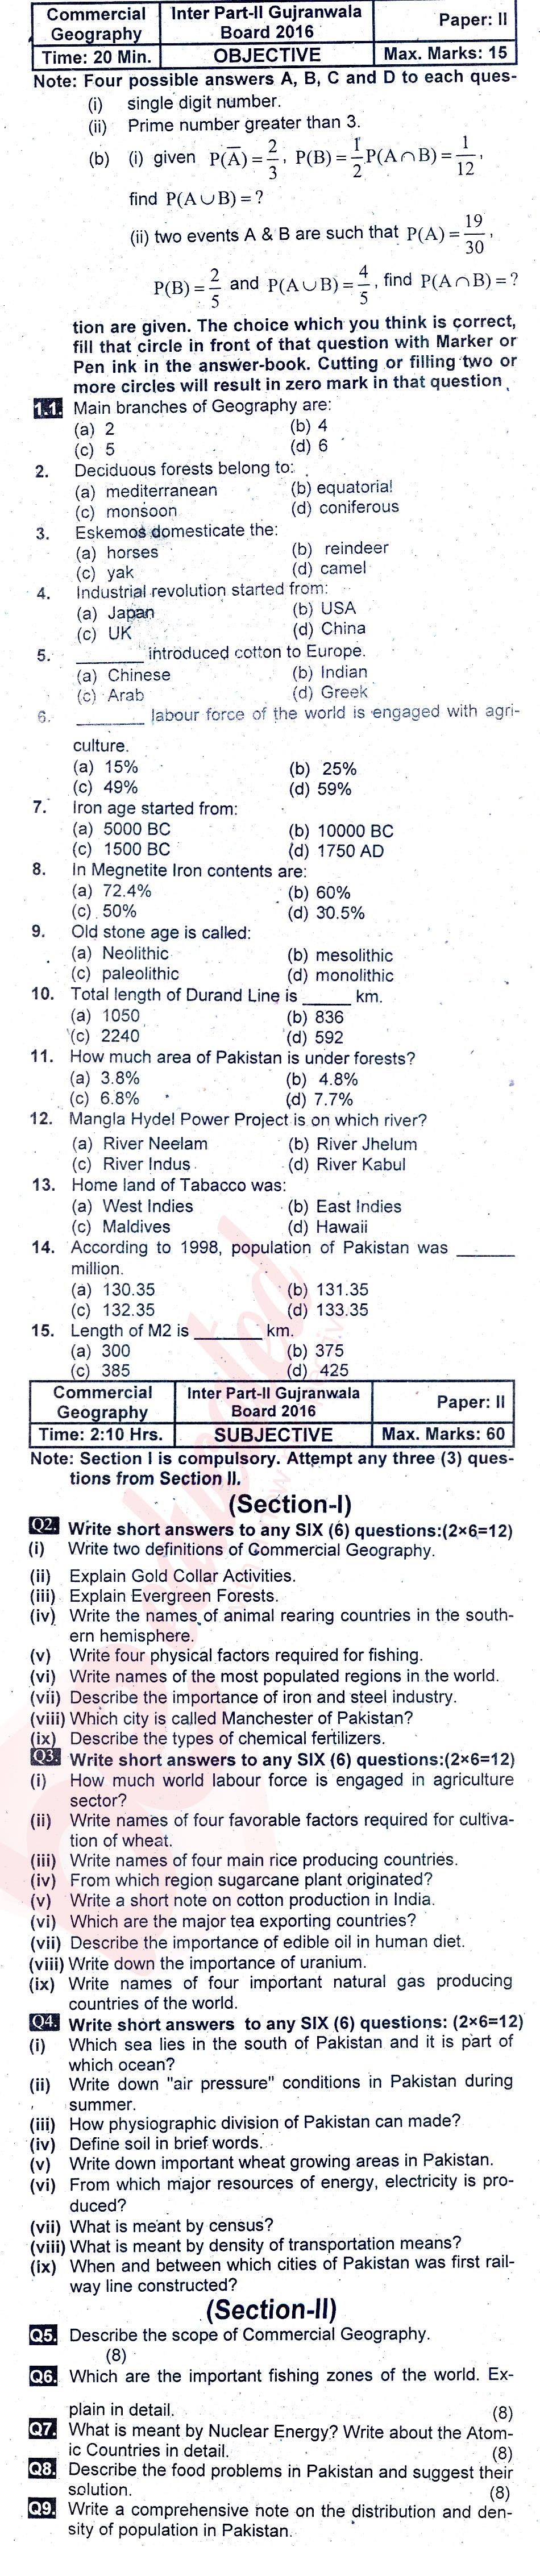 Commercial Geography ICOM Part 2 Past Paper Group 1 BISE Gujranwala 2016